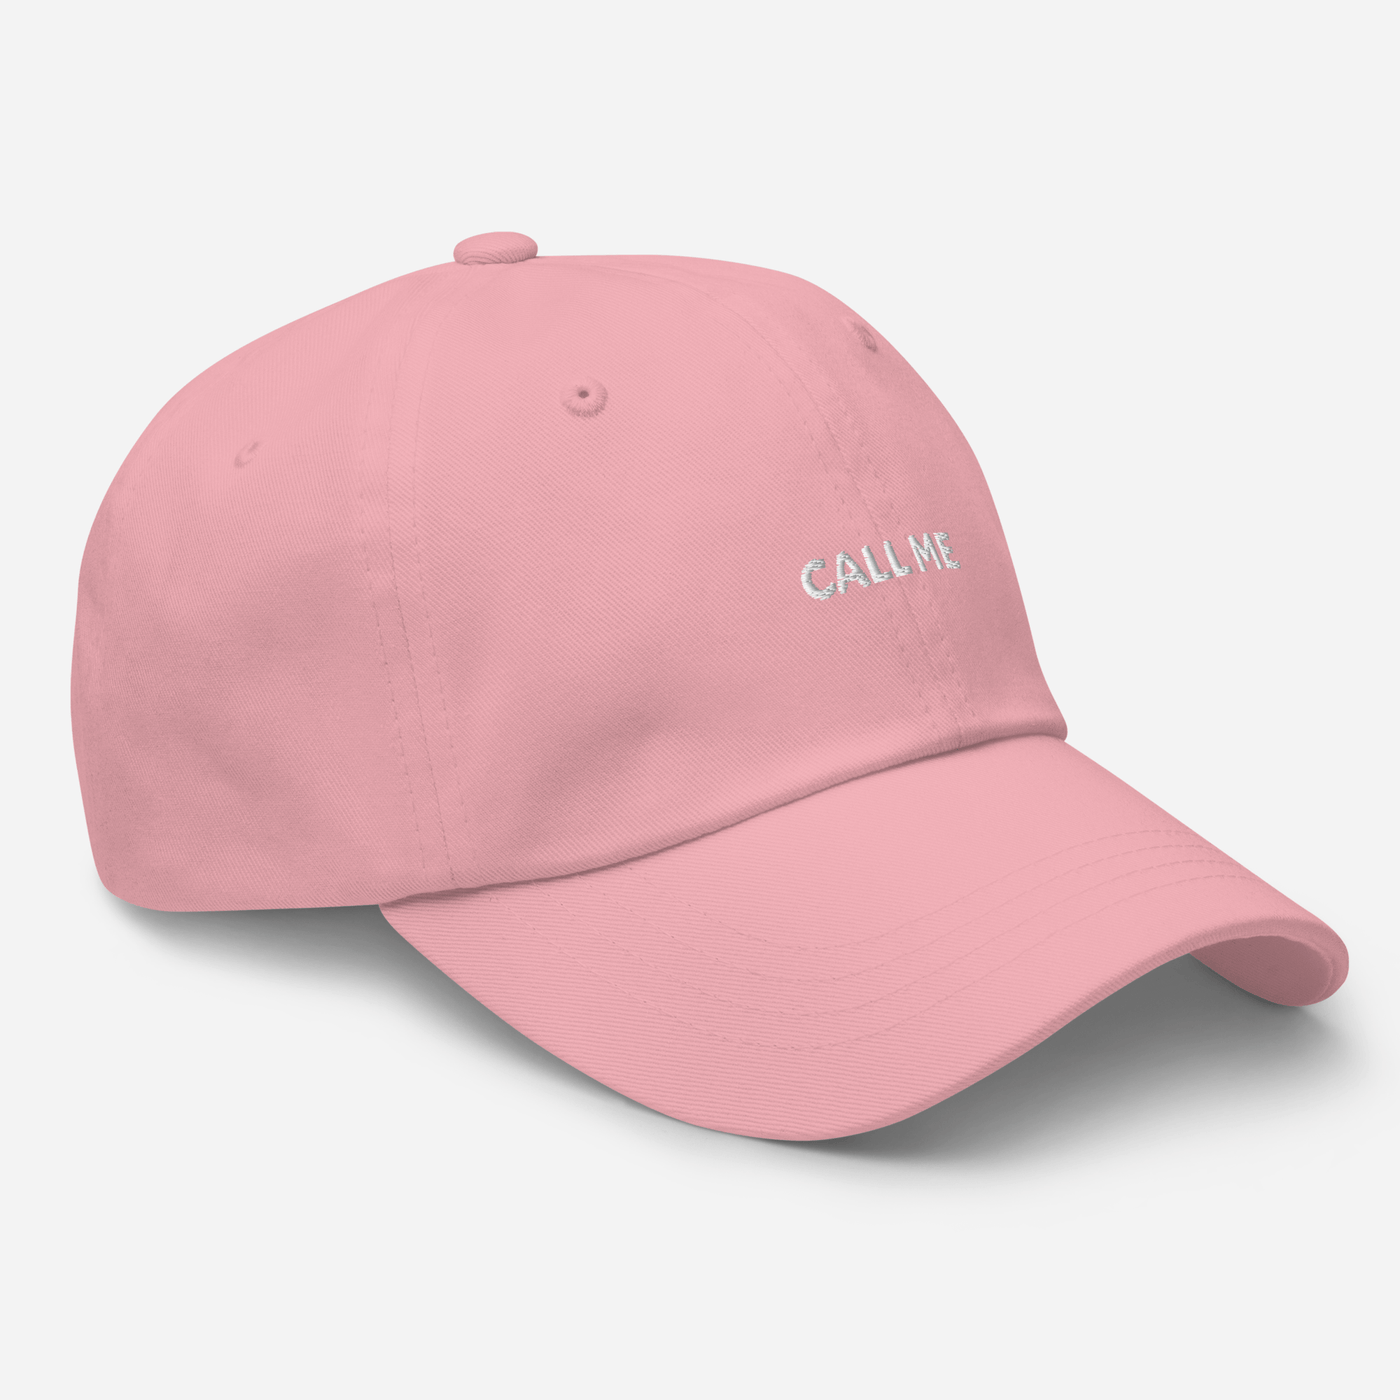 Call Me Dad hat - Pink - - Just Another Cap Store